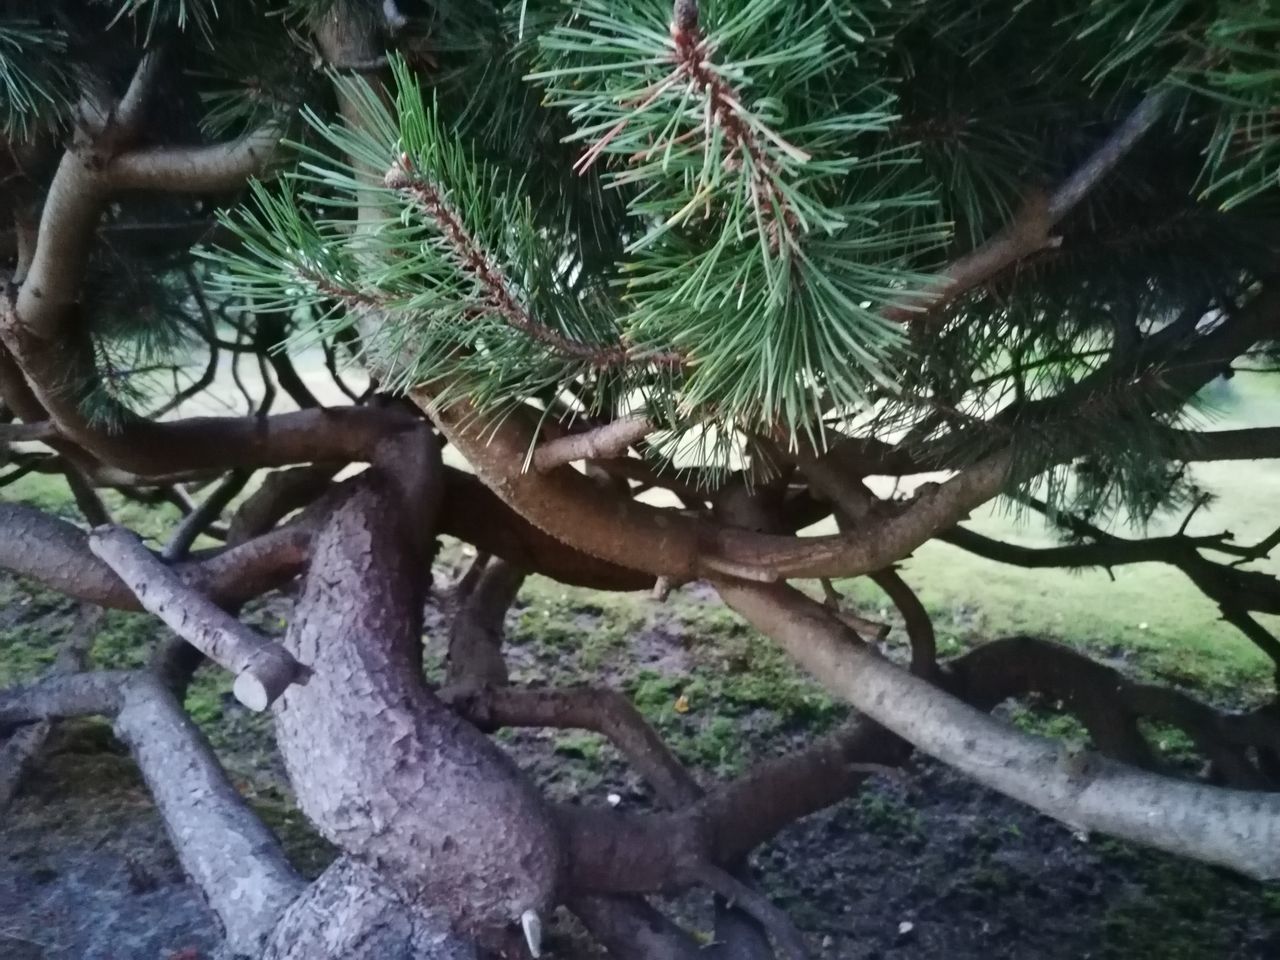 CLOSE-UP OF PINE TREE BRANCH